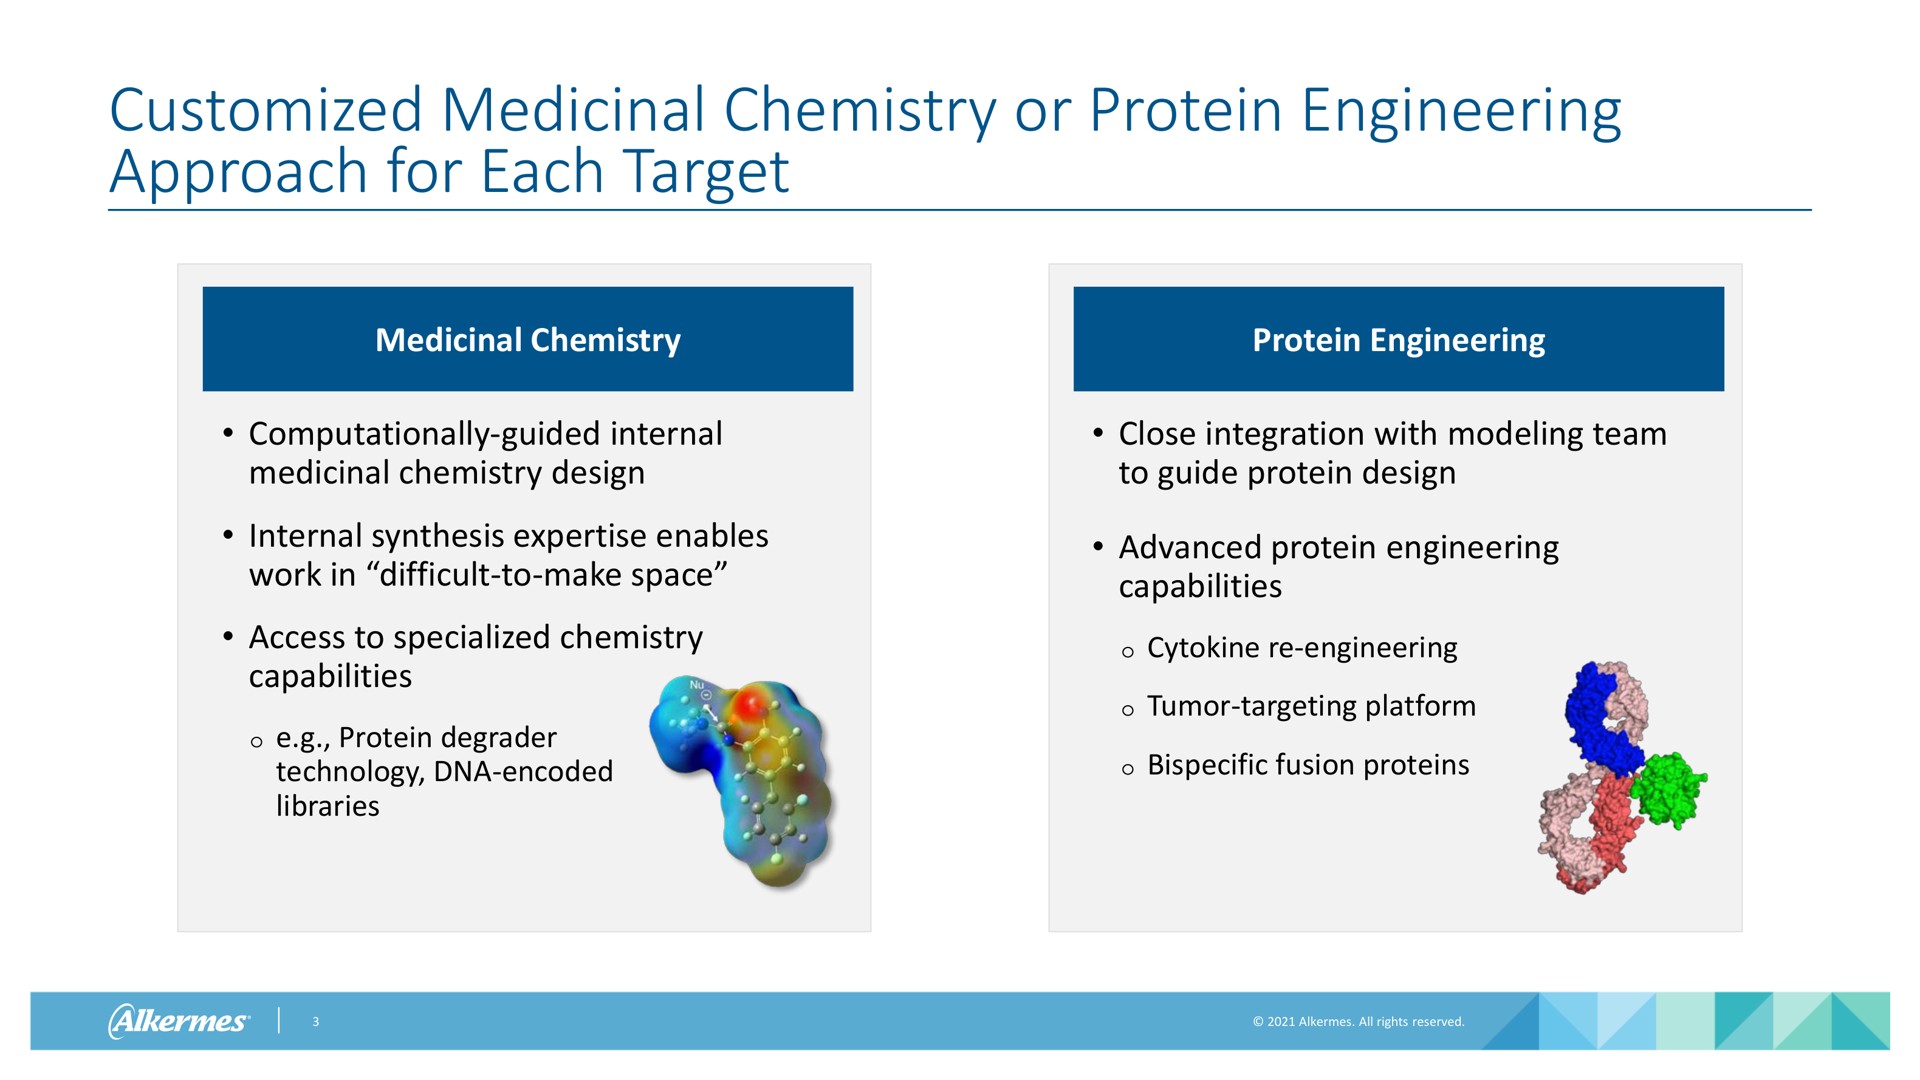 medicinal chemistry or protein engineering approach for each target medicinal chemistry protein engineering guided internal medicinal chemistry design internal synthesis enables work in difficult to make space access to specialized chemistry capabilities protein degrader technology encoded libraries close integration with modeling team to guide protein design advanced protein engineering capabilities engineering tumor targeting platform fusion proteins | Alkermes